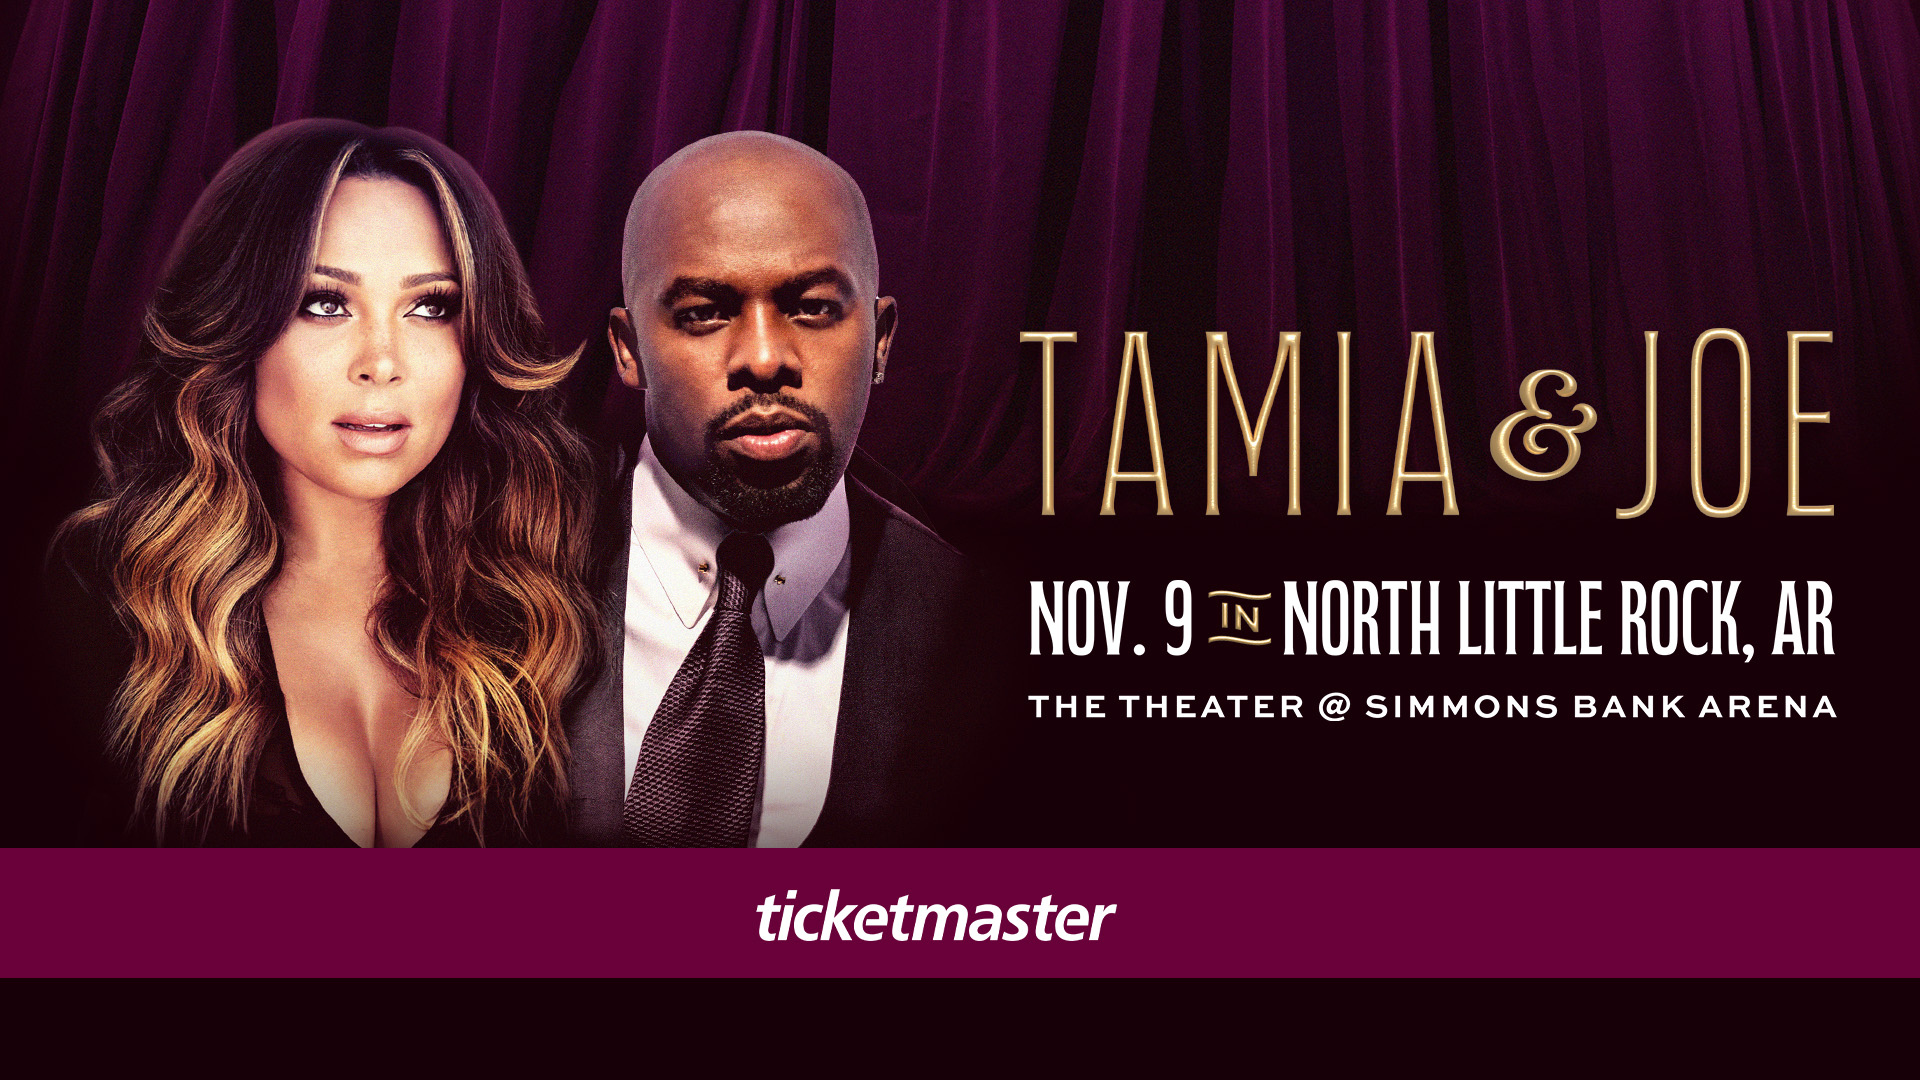 Tamia and Joe are bringing their co-headlining tour to The Theater @ Simmons Bank Arena on November 9!